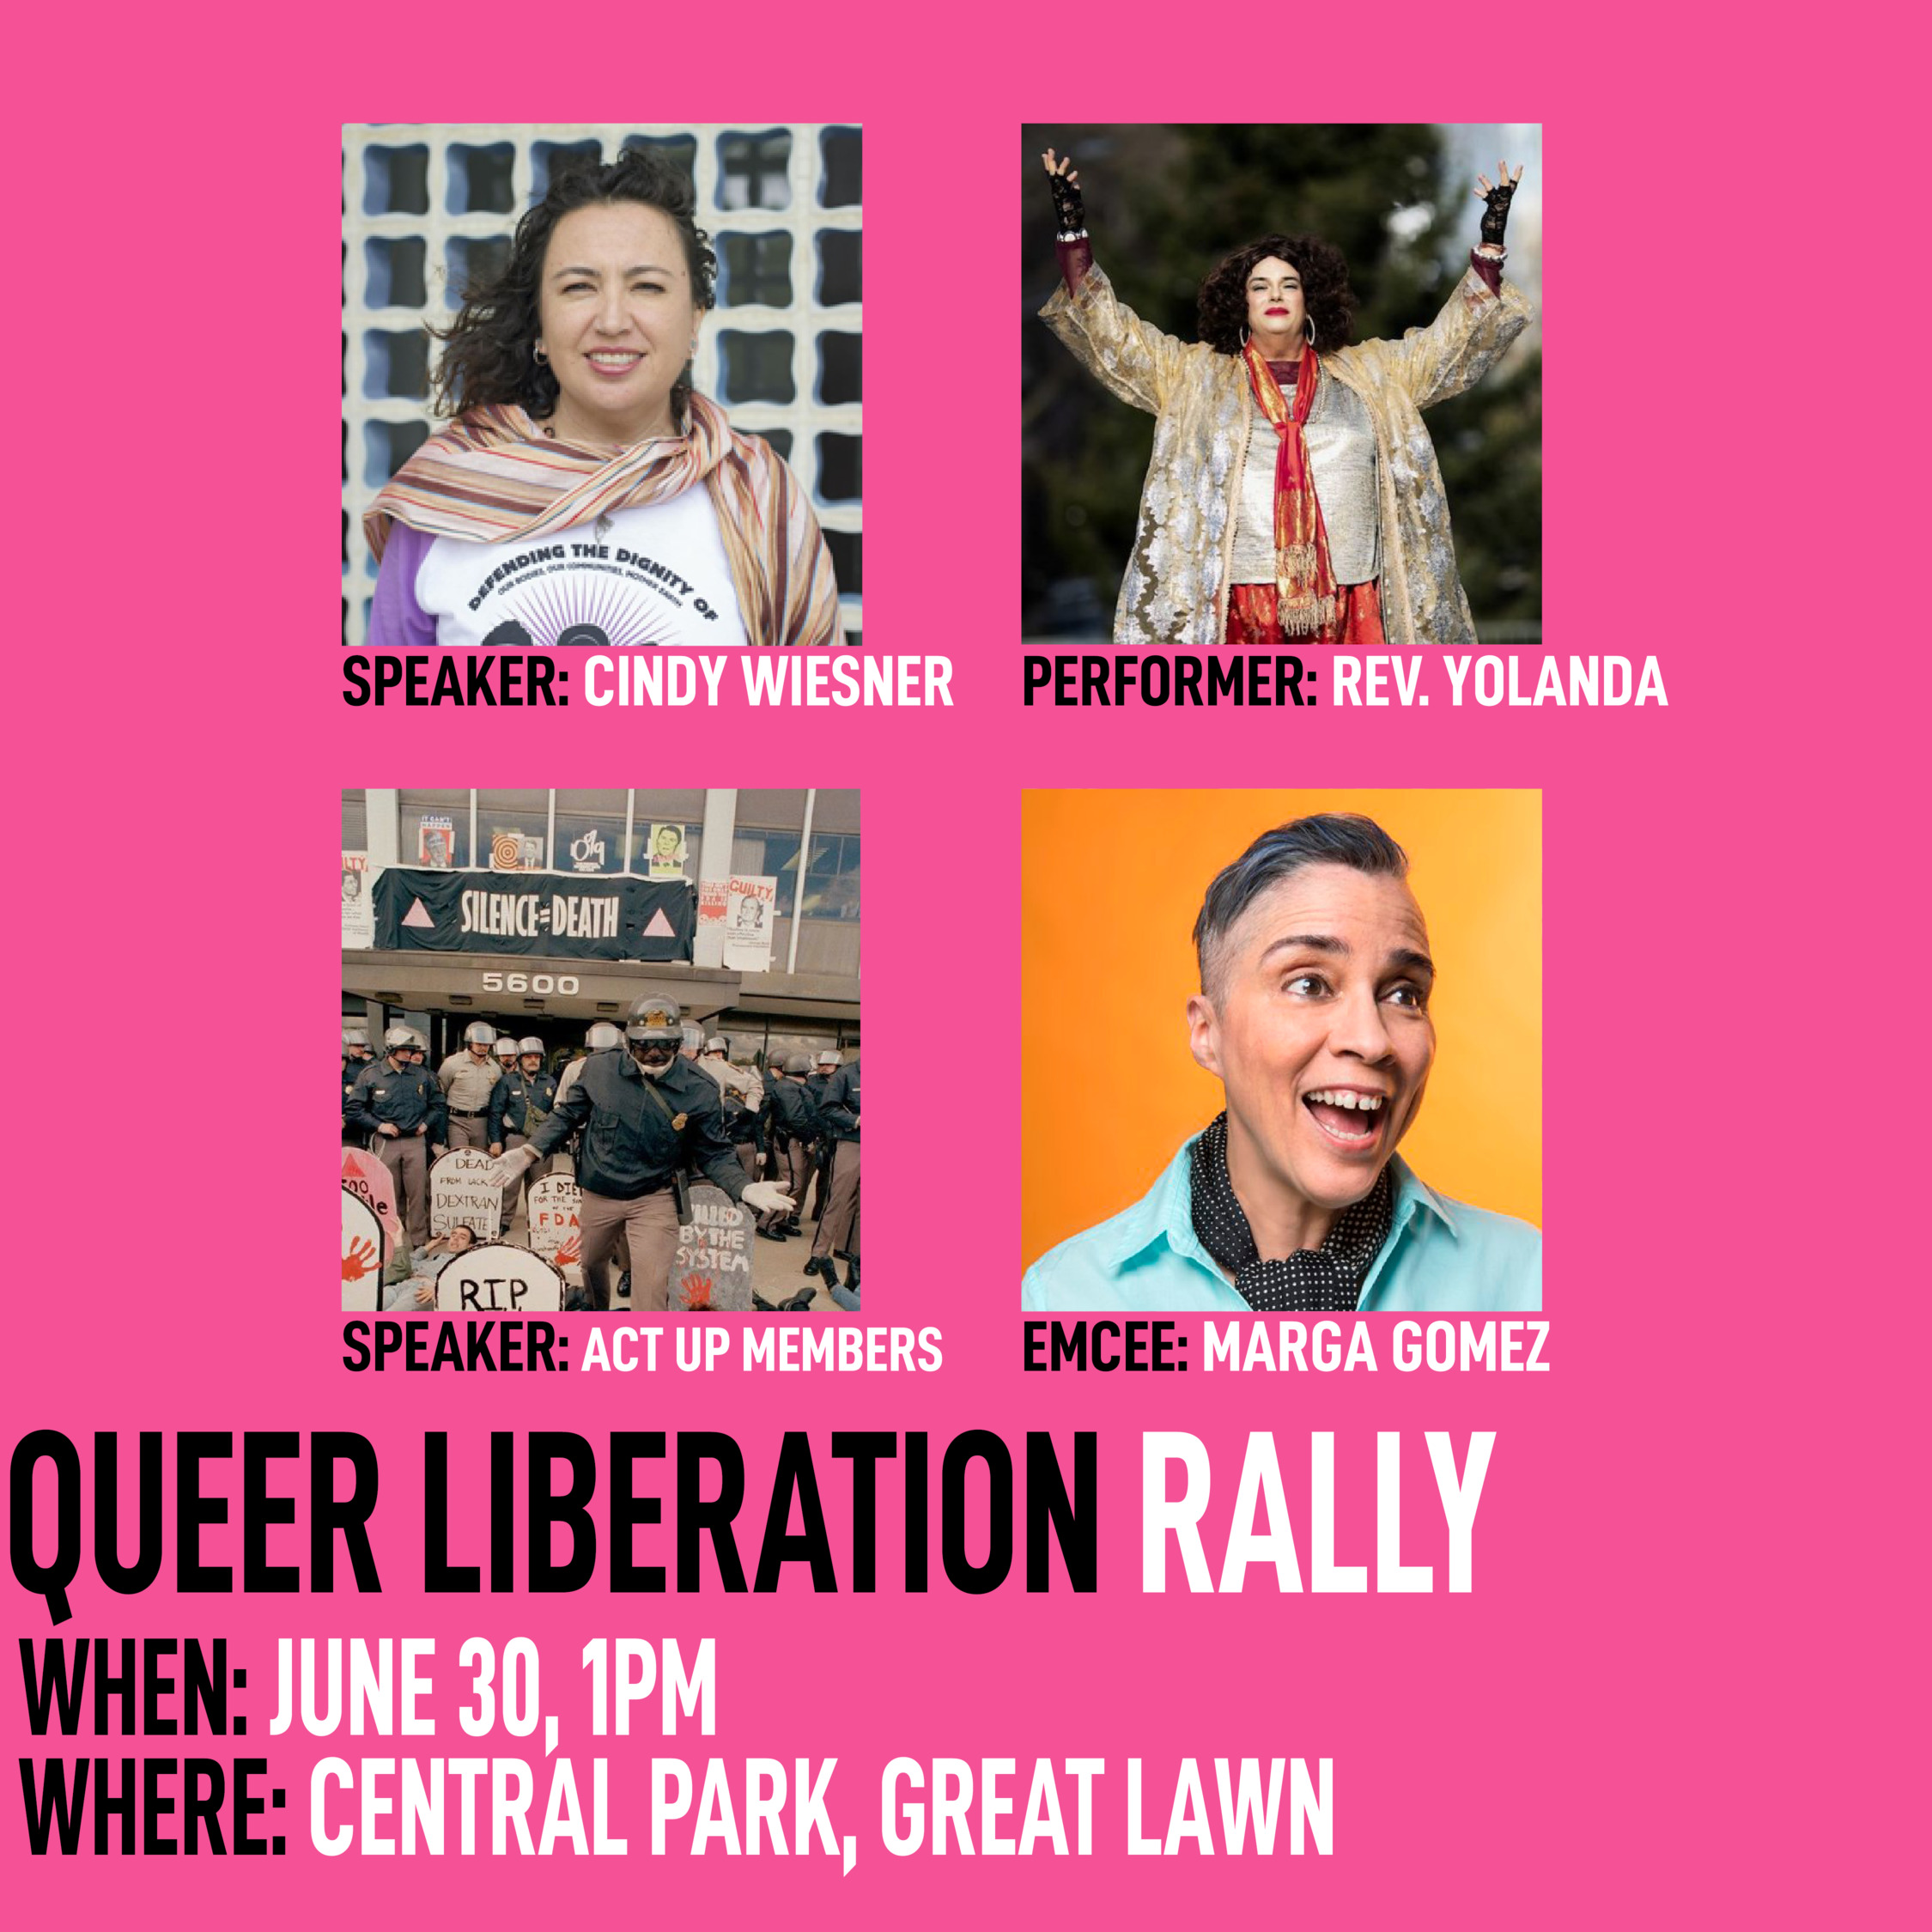 [RPC] Queer Liberation Rally Speakers 4 Square5.jpg